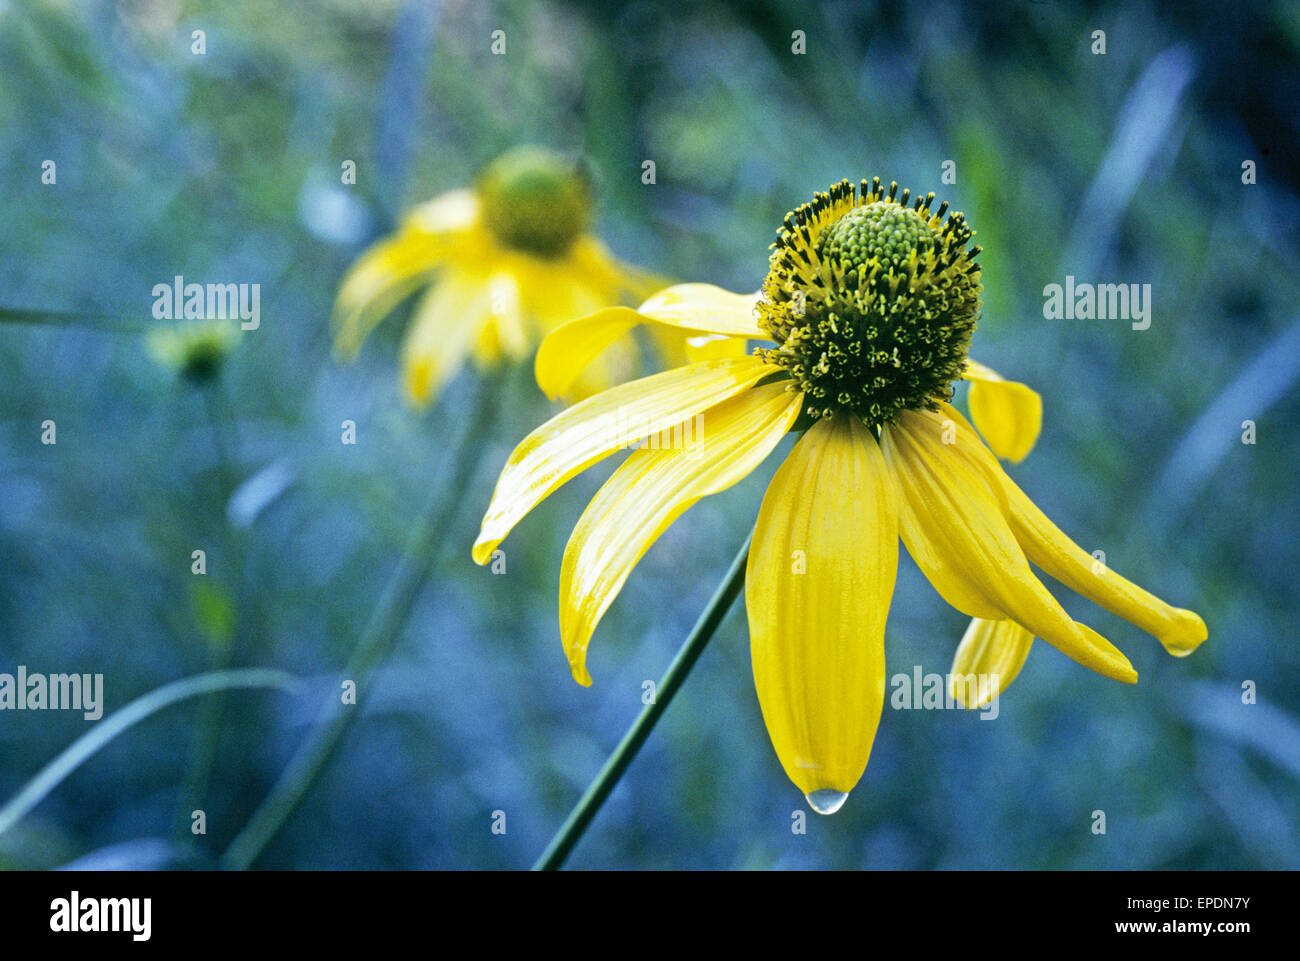 Yellow coneflowers growing in an aspen forest in northern New Mexico Stock Photo